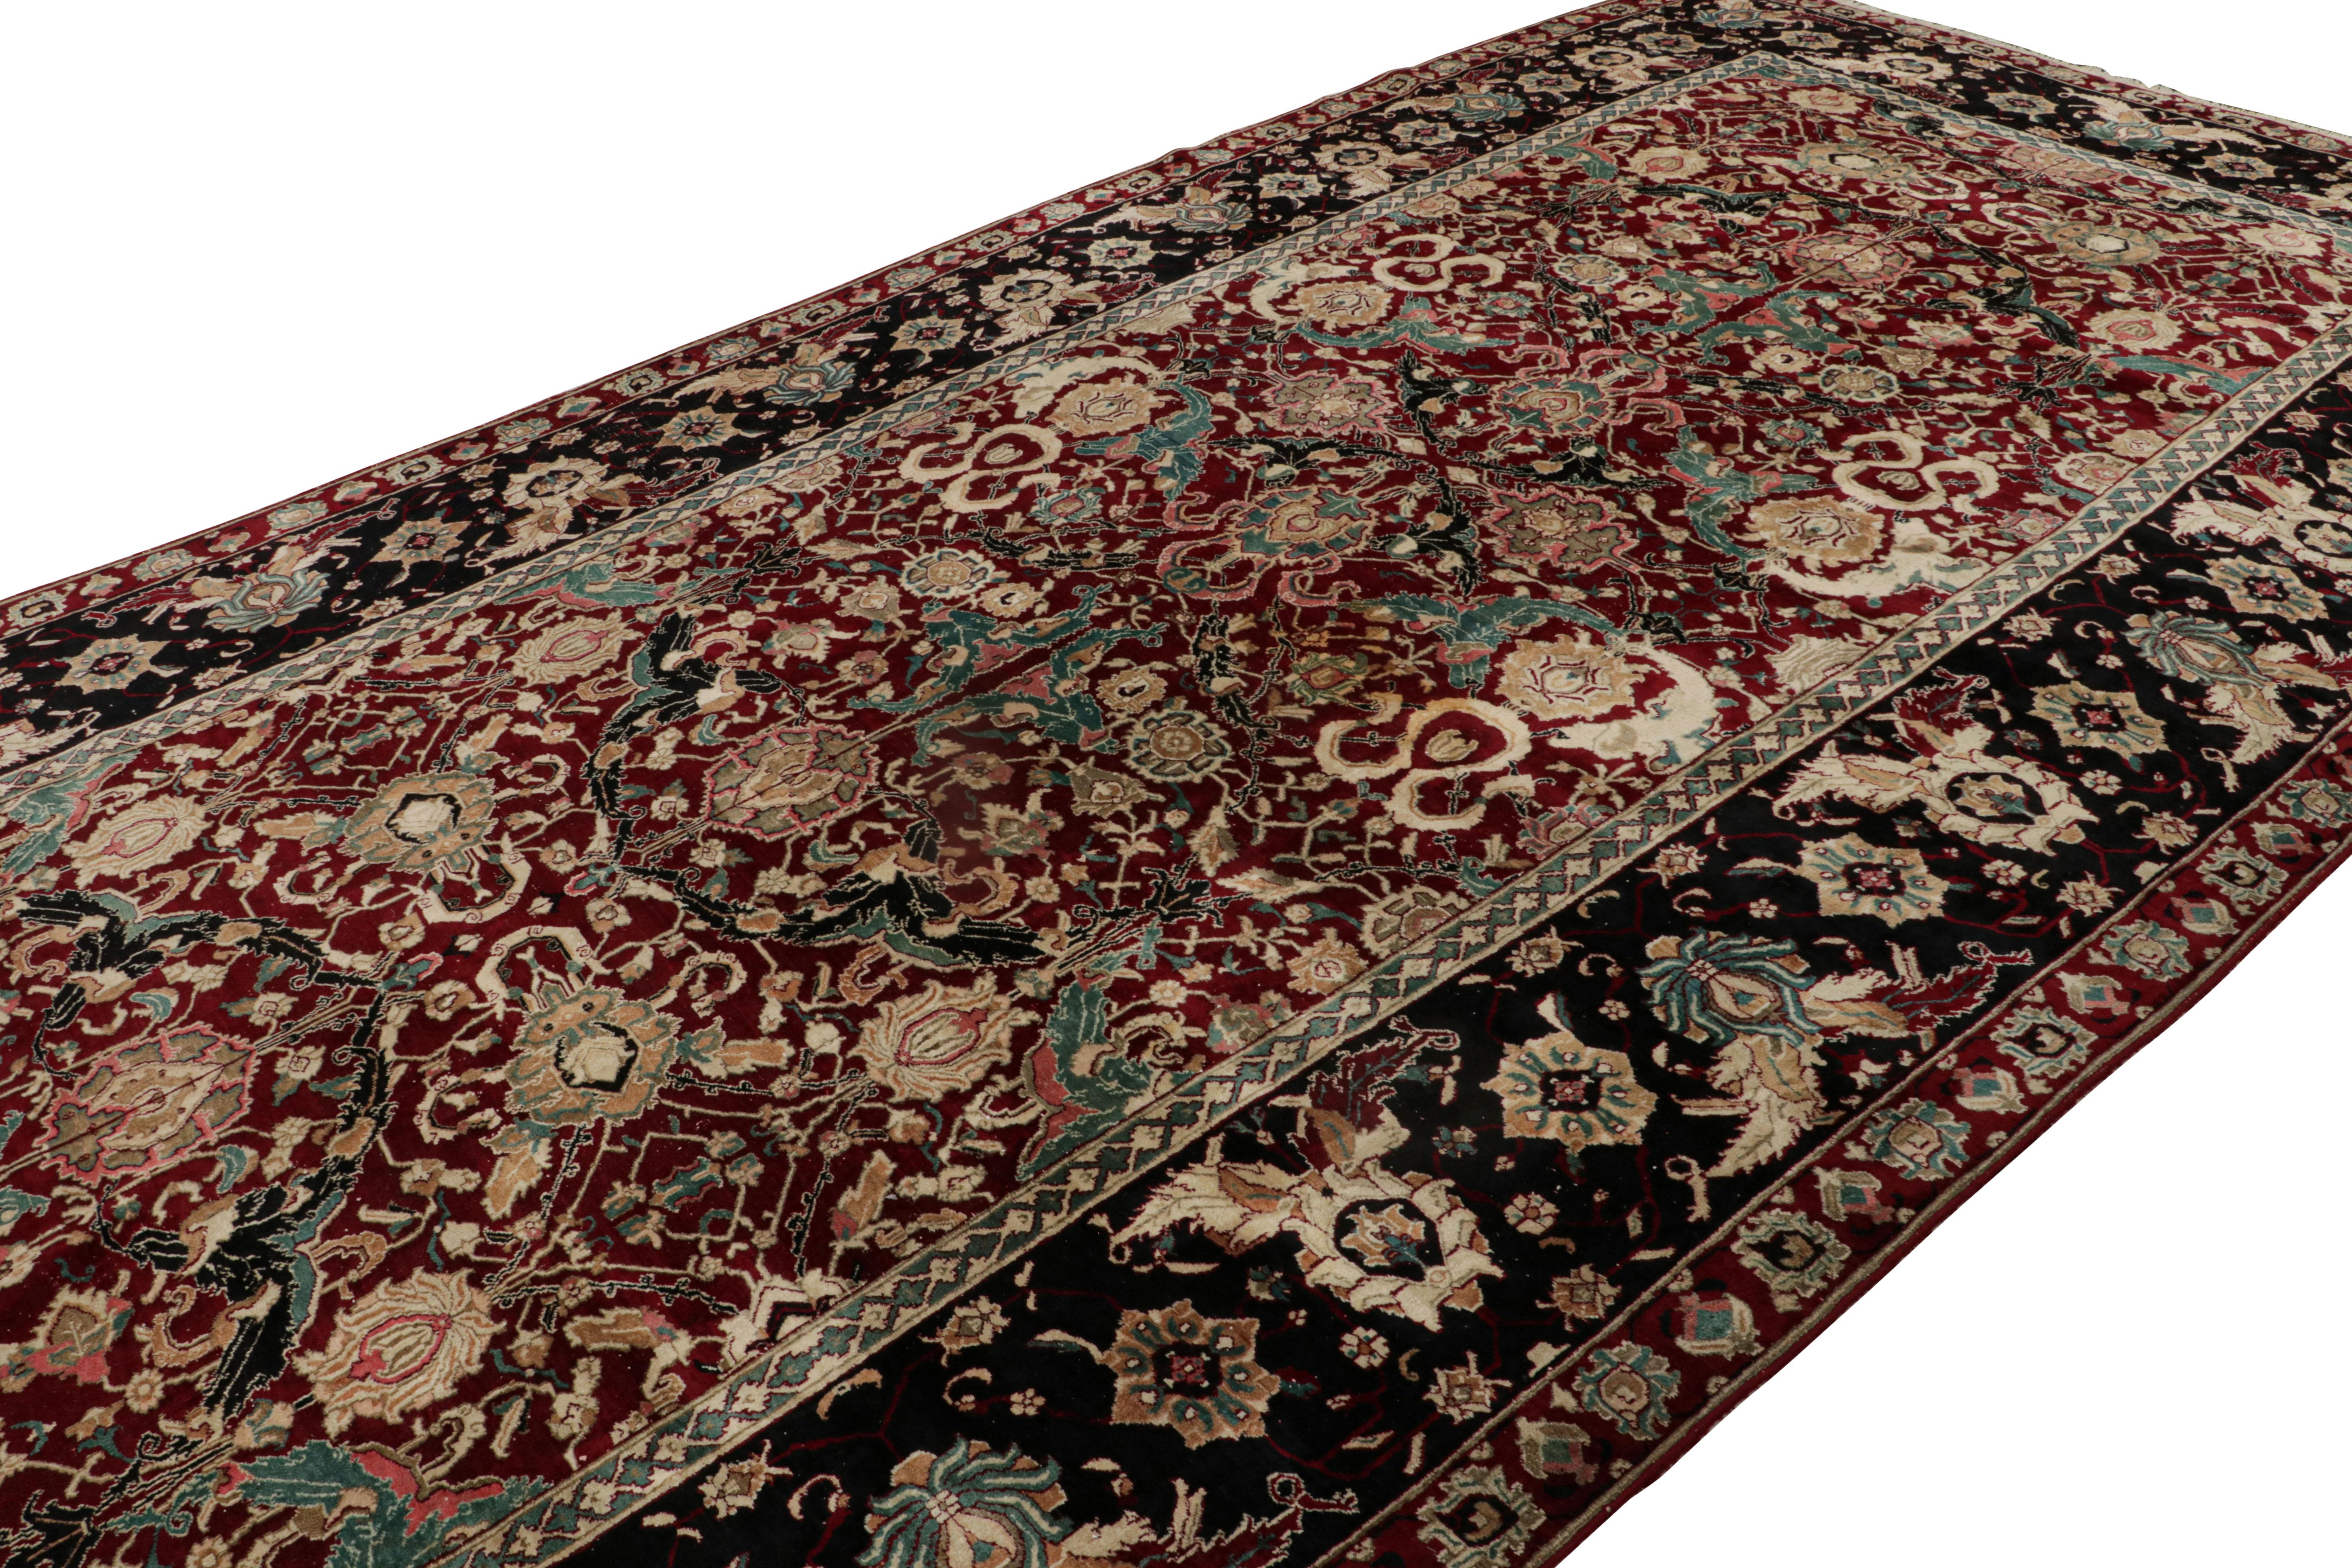 Hand-knotted in wool, this 9x27 antique Agra gallery runner jail rug features dense and finely detailed all-over floral patterns like few of this or any period. 

On the Design: 

Connoisseurs will admire this outstanding antique Agra gallery runner